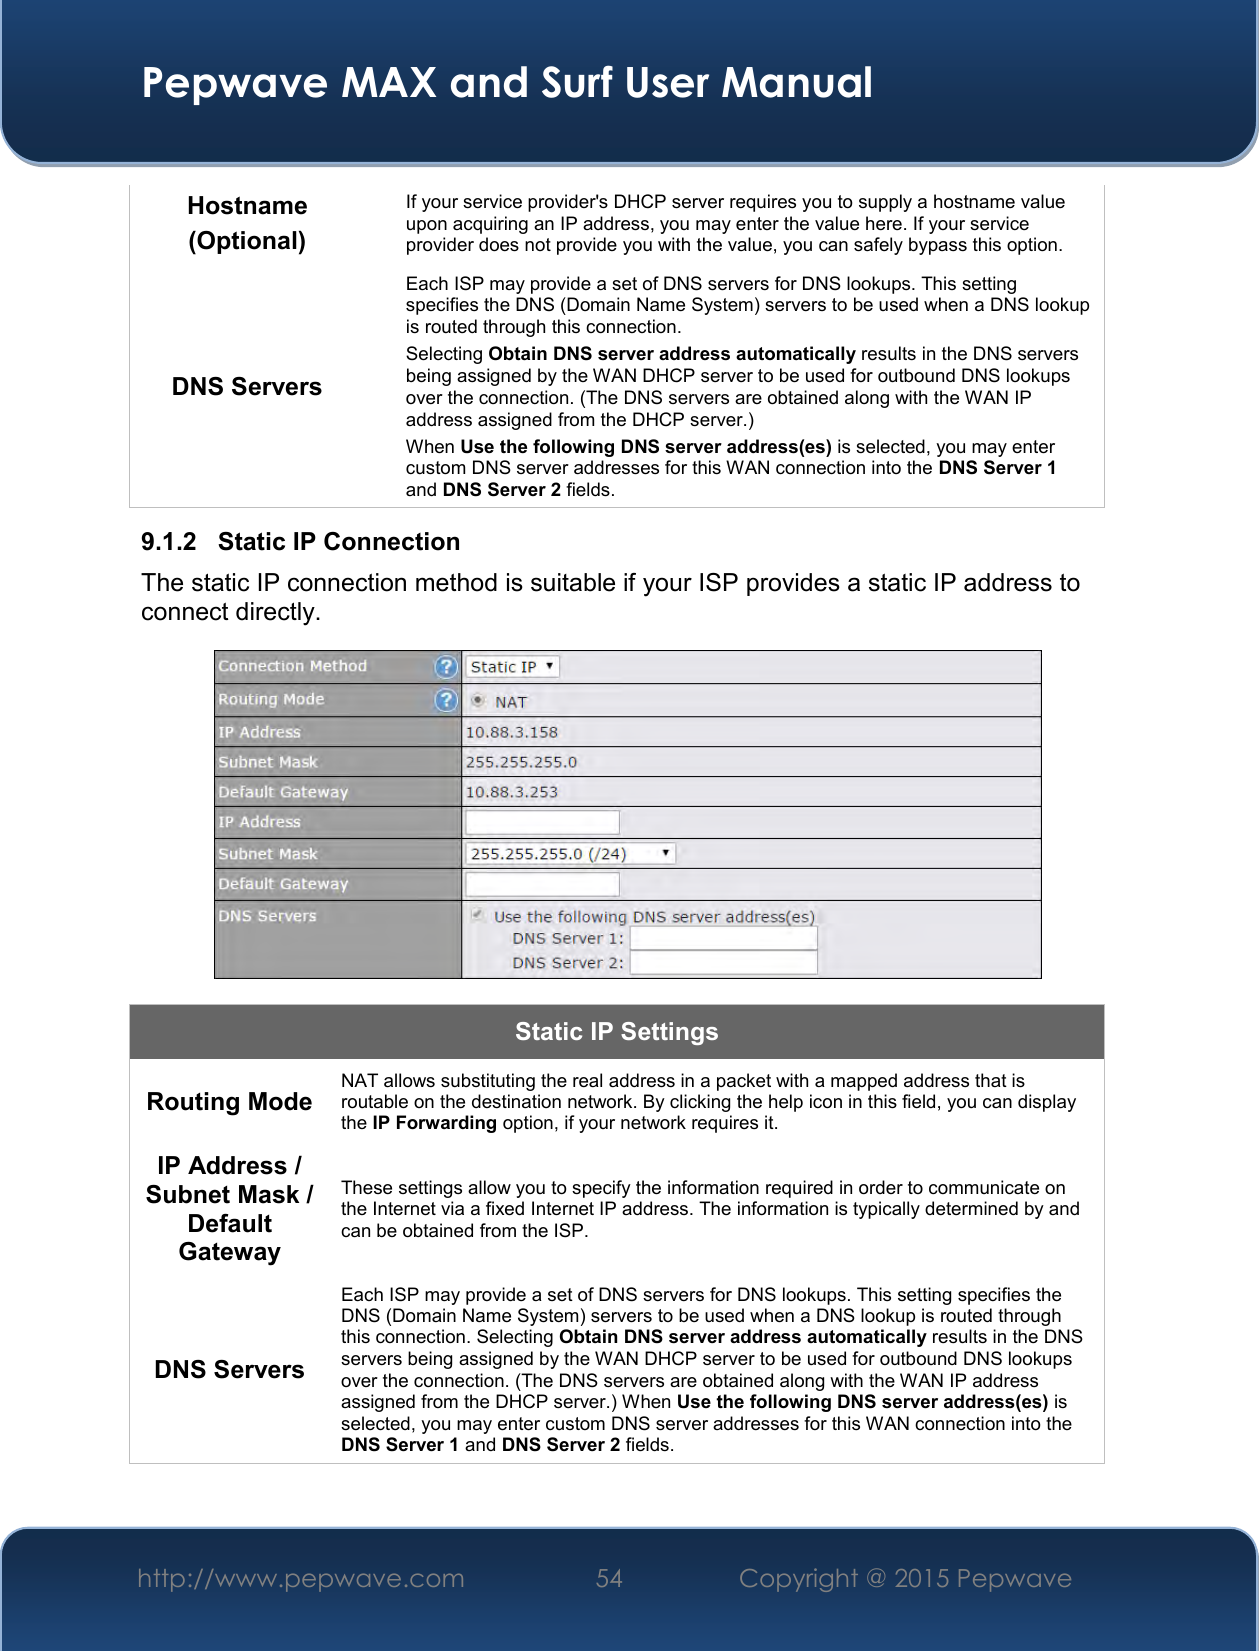  Pepwave MAX and Surf User Manual http://www.pepwave.com 54   Copyright @ 2015 Pepwave   Hostname (Optional) If your service provider&apos;s DHCP server requires you to supply a hostname value upon acquiring an IP address, you may enter the value here. If your service provider does not provide you with the value, you can safely bypass this option. DNS Servers Each ISP may provide a set of DNS servers for DNS lookups. This setting specifies the DNS (Domain Name System) servers to be used when a DNS lookup is routed through this connection.  Selecting Obtain DNS server address automatically results in the DNS servers being assigned by the WAN DHCP server to be used for outbound DNS lookups over the connection. (The DNS servers are obtained along with the WAN IP address assigned from the DHCP server.) When Use the following DNS server address(es) is selected, you may enter custom DNS server addresses for this WAN connection into the DNS Server 1 and DNS Server 2 fields. 9.1.2  Static IP Connection The static IP connection method is suitable if your ISP provides a static IP address to connect directly.   Static IP Settings Routing Mode NAT allows substituting the real address in a packet with a mapped address that is routable on the destination network. By clicking the help icon in this field, you can display the IP Forwarding option, if your network requires it. IP Address / Subnet Mask / Default Gateway These settings allow you to specify the information required in order to communicate on the Internet via a fixed Internet IP address. The information is typically determined by and can be obtained from the ISP. DNS Servers Each ISP may provide a set of DNS servers for DNS lookups. This setting specifies the DNS (Domain Name System) servers to be used when a DNS lookup is routed through this connection. Selecting Obtain DNS server address automatically results in the DNS servers being assigned by the WAN DHCP server to be used for outbound DNS lookups over the connection. (The DNS servers are obtained along with the WAN IP address assigned from the DHCP server.) When Use the following DNS server address(es) is selected, you may enter custom DNS server addresses for this WAN connection into the DNS Server 1 and DNS Server 2 fields.   